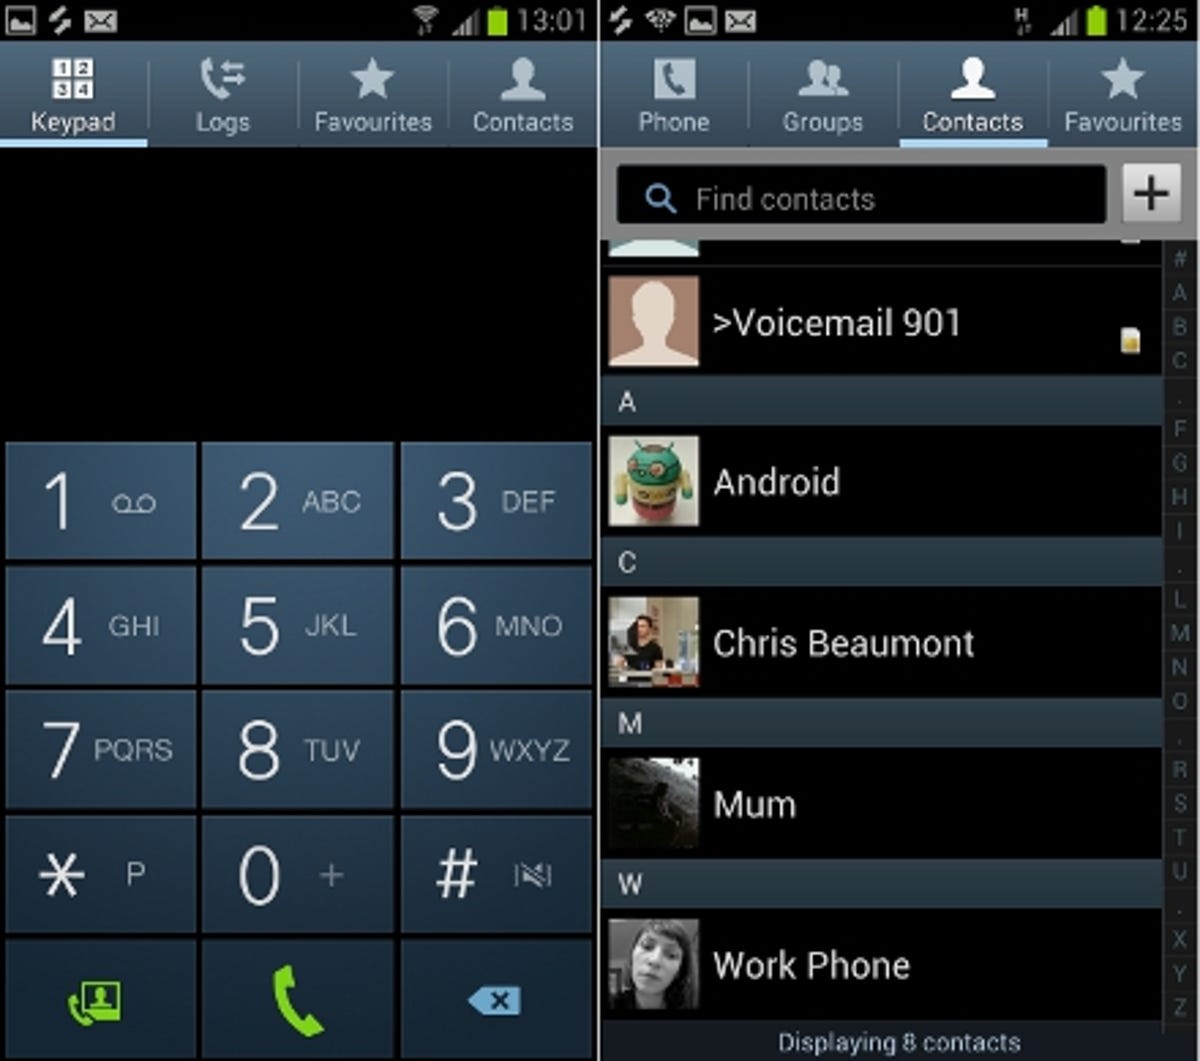 Samsung Galaxy S3 dialling contacts